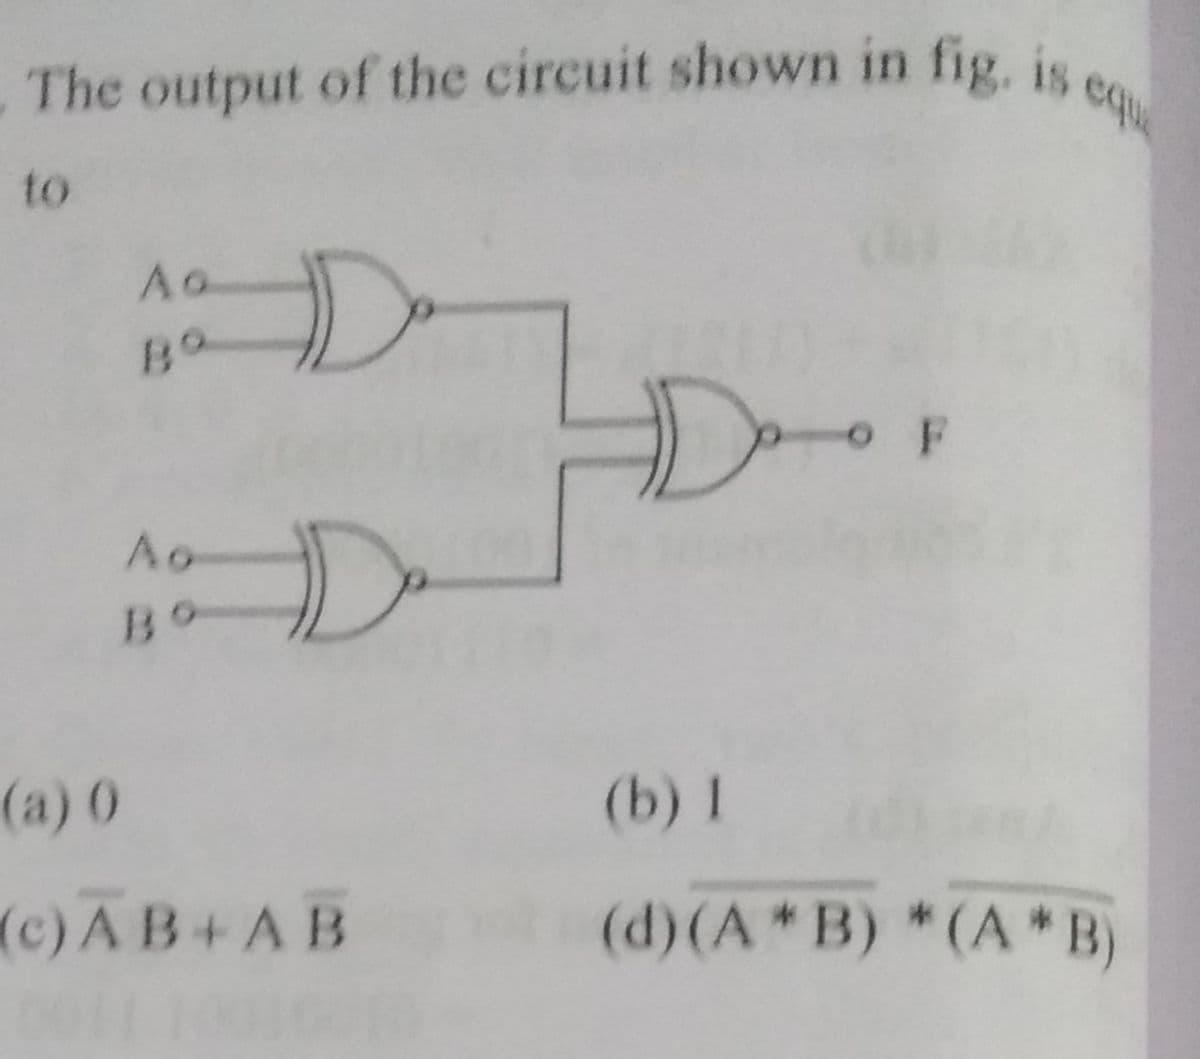 equ
The output of the circuit shown in fig, is
to
Ao
D-
D.
O F
Ao
Bo
(a) ()
(b) 1
(c)A B+AB
(d)(A*B) *(A *B)
